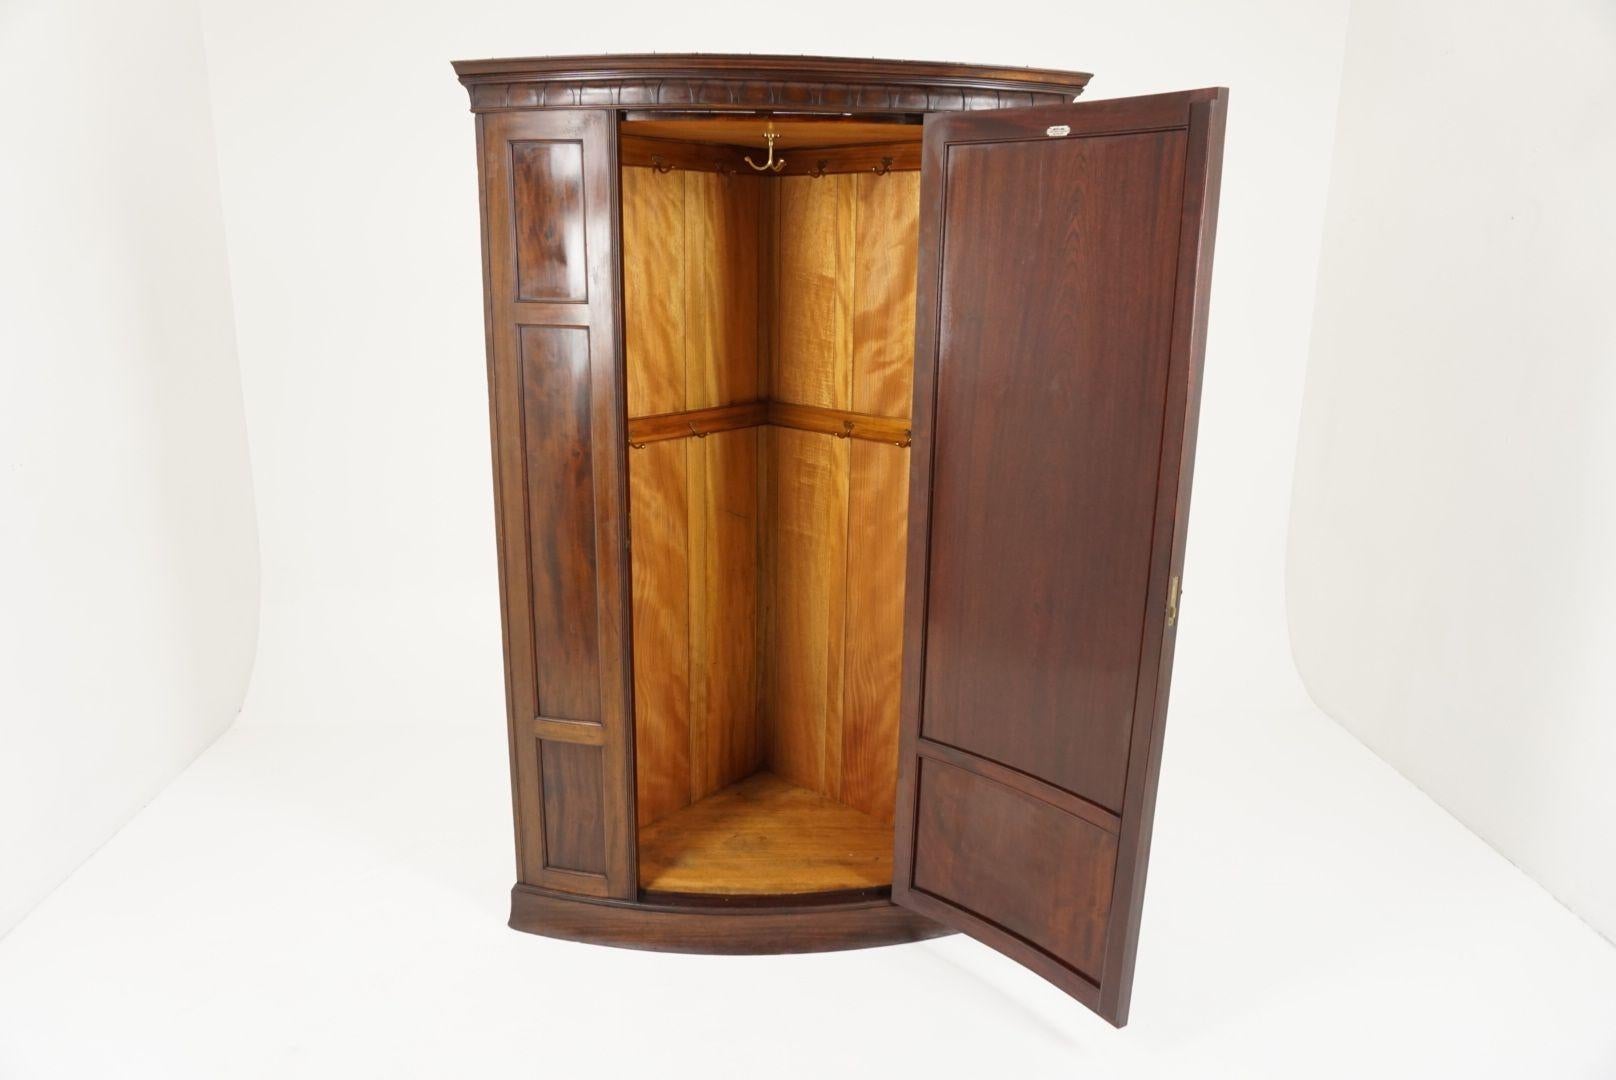 Antique corner wardrobe, bow front flamed mahogany, corner armoire, closet, Scotland 1900 B1945

Scotland 1900
Solid mahogany and veneer
Original finish
Moulded Dentil cornice on top
Single bowed paneled doors
Flanked by a pair of rounded